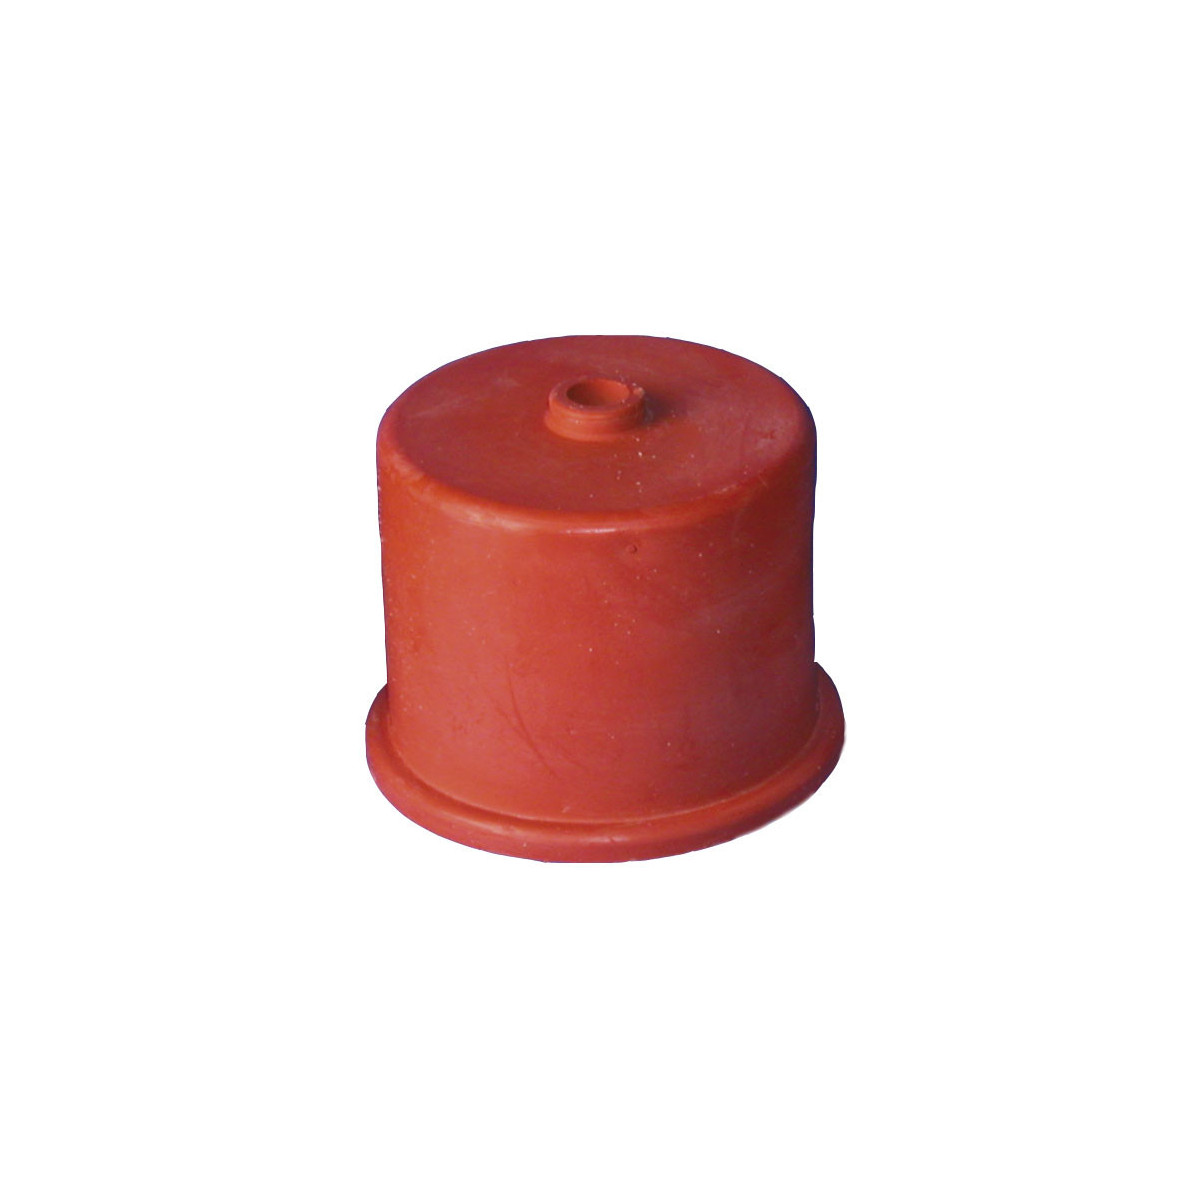 Rubber cap nr 4, 40mm, with 9mm hole